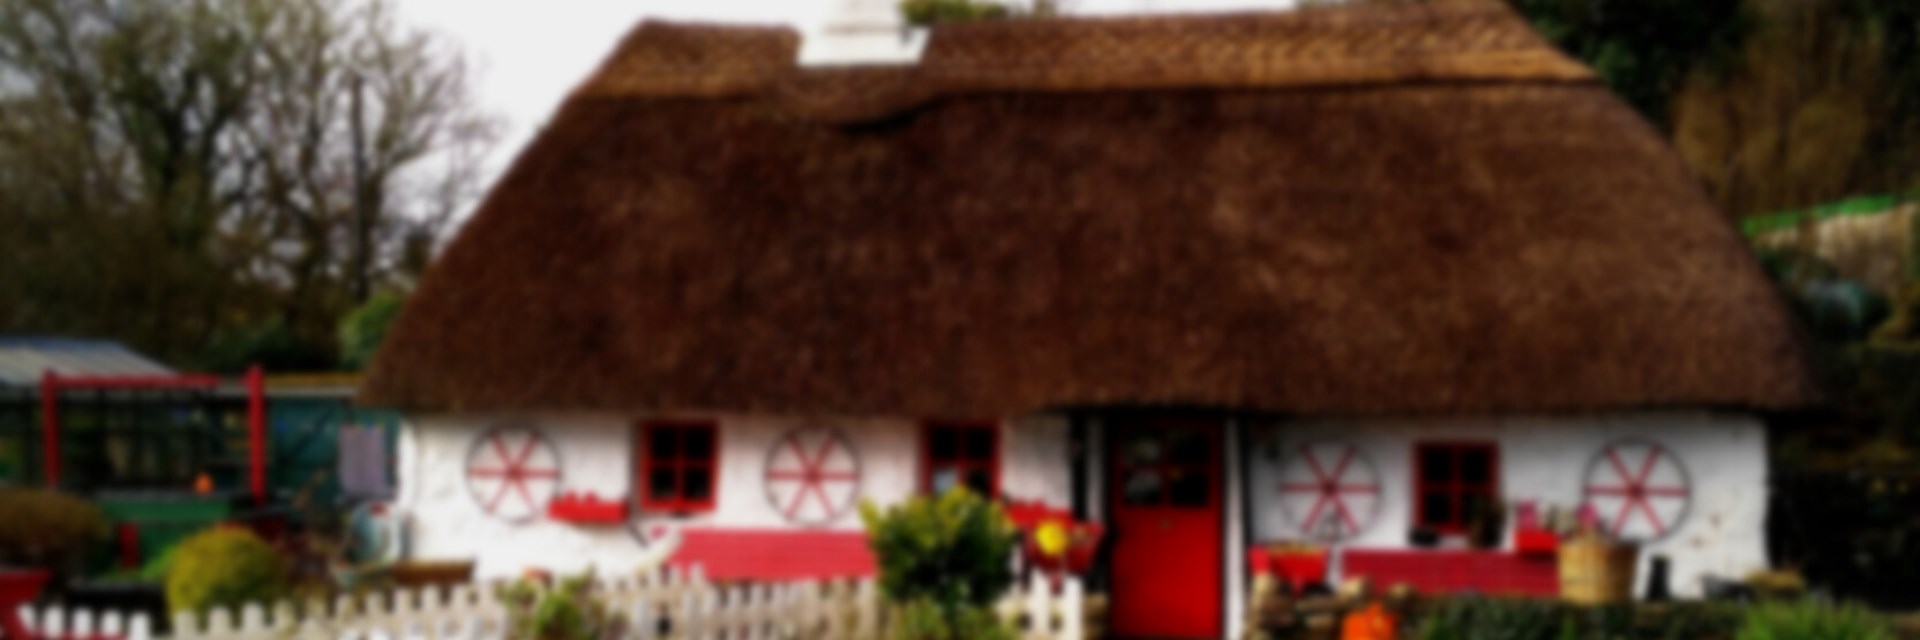 Thatched Property In The UK